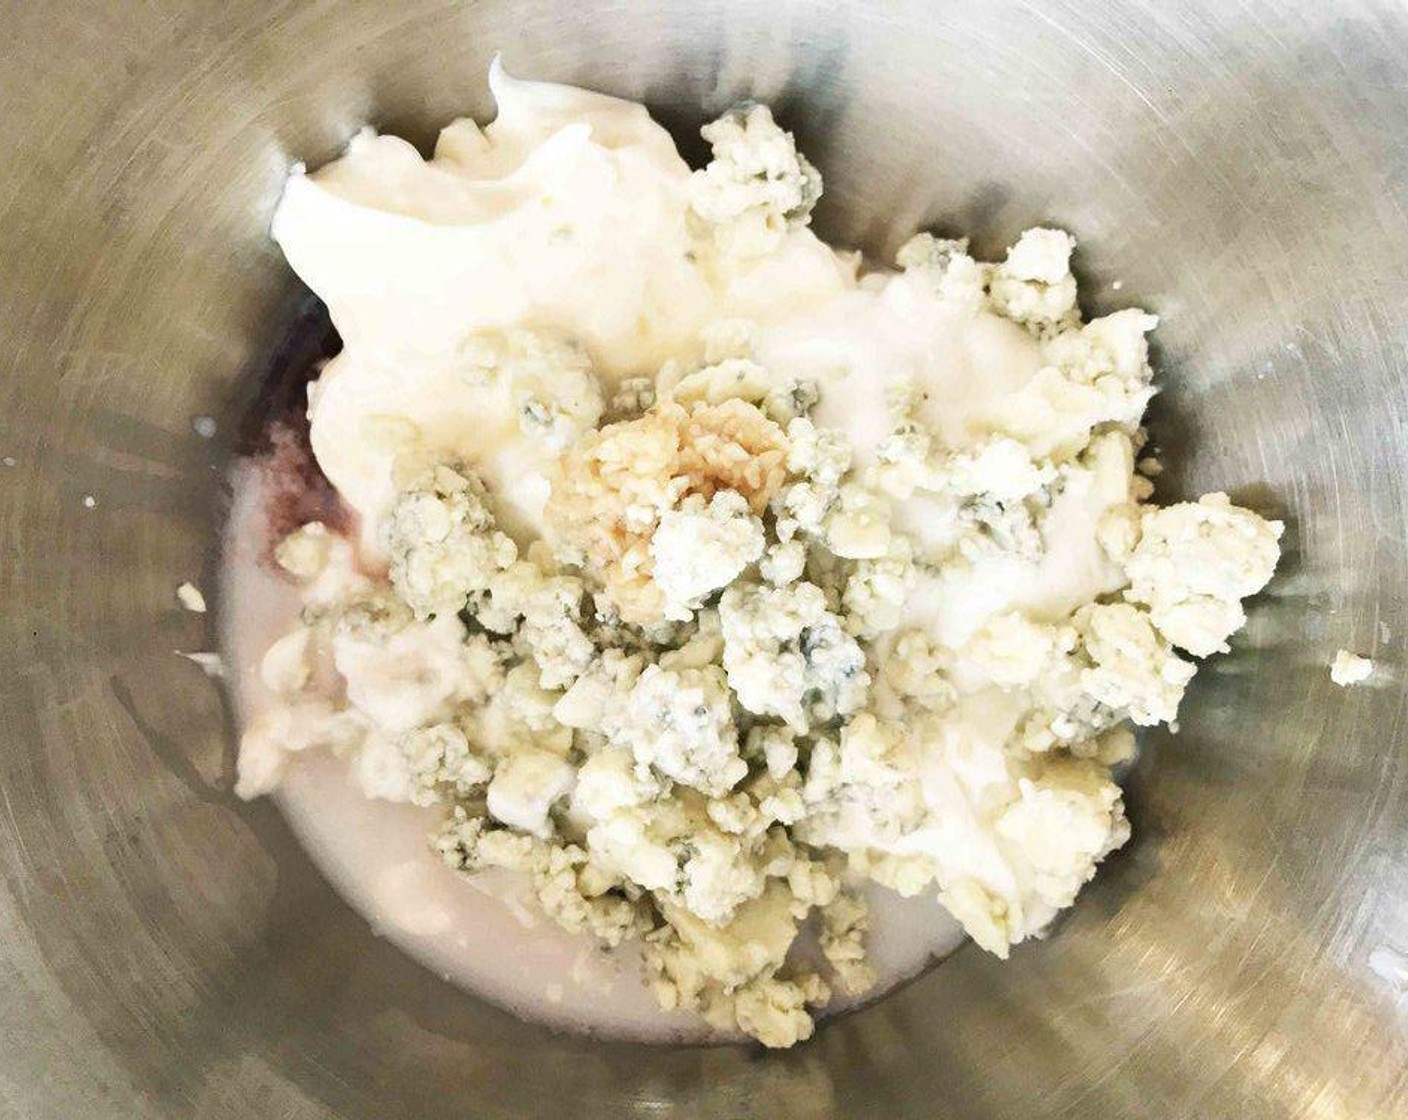 step 2 Place the Light Mayonnaise (1/2 cup), Nonfat Plain Greek Yogurt (1/2 cup), Gorgonzola Cheese (1/4 cup), 2% Reduced Fat Milk (0.5 fl oz), Port Wine (0.3 fl oz), and minced garlic into a medium bowl and stir together to combine. Season with Salt (to taste) and Ground Black Pepper (to taste).